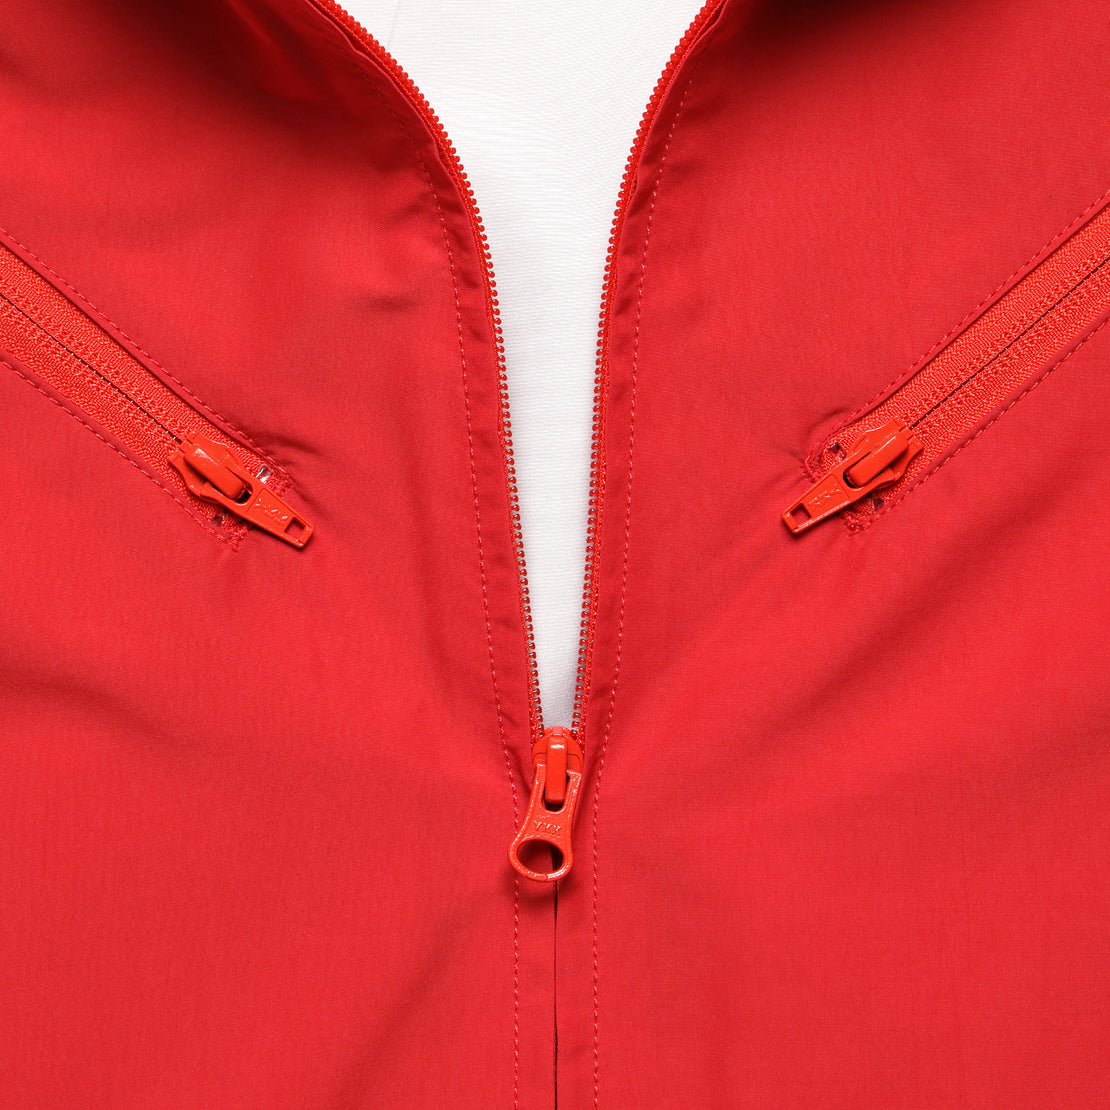 Shell Flight Jacket - Red - Gramicci - STAG Provisions - Outerwear - Coat / Jacket